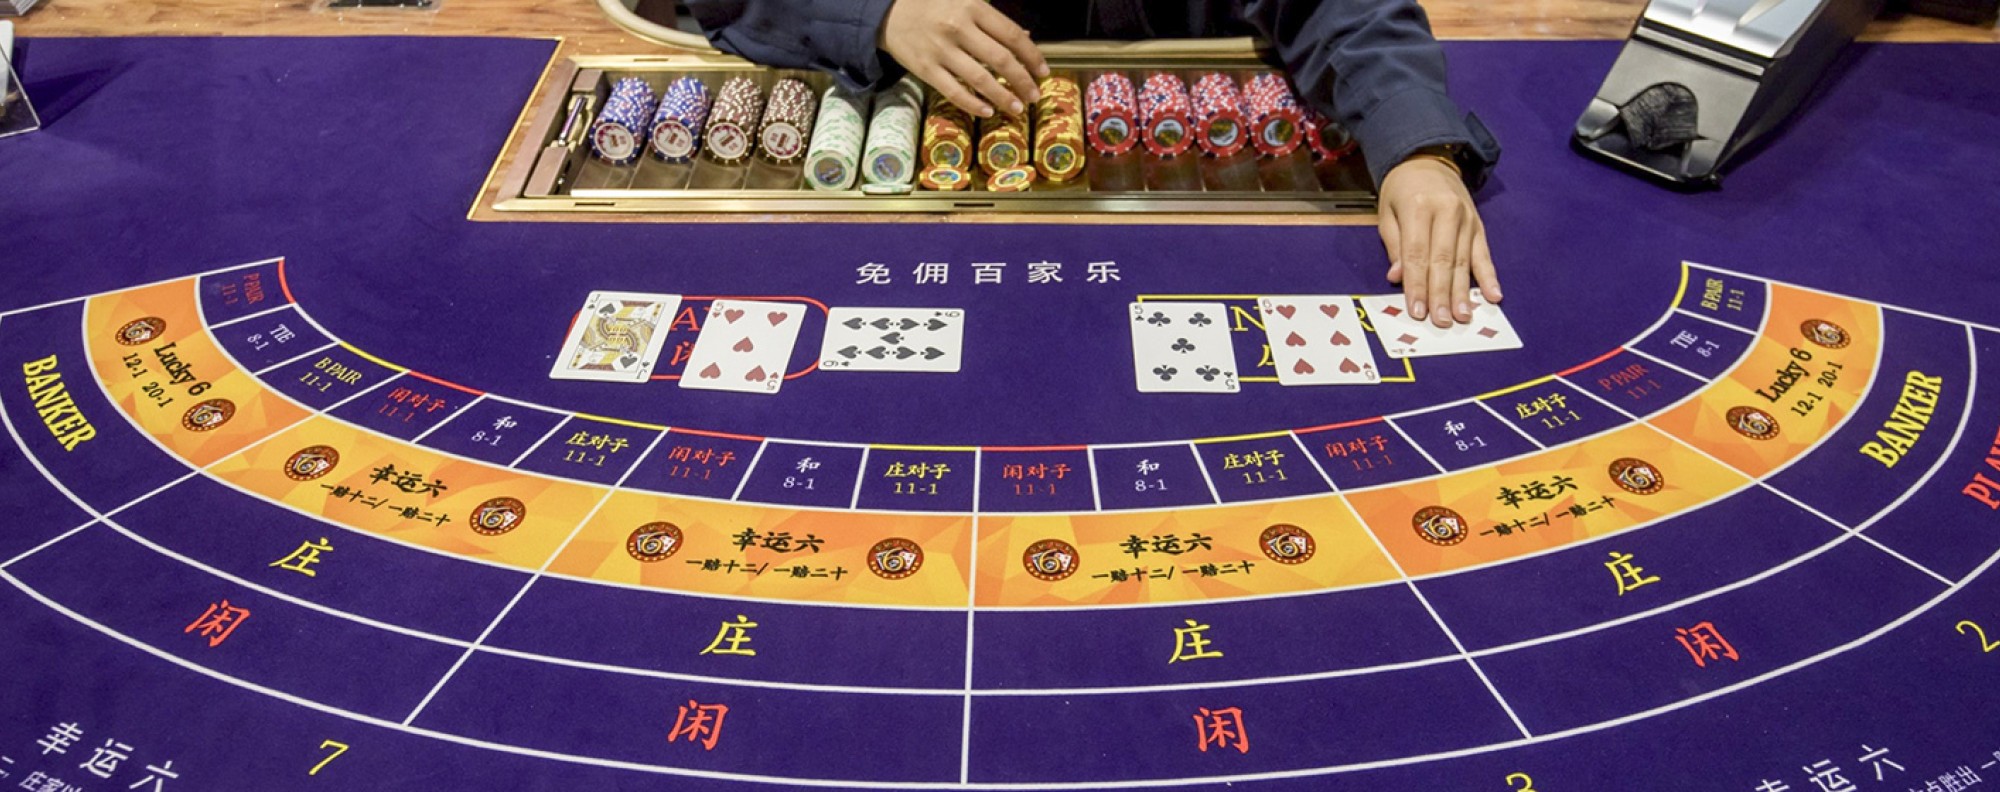 A baccarat table in Macau. Photo: Bloomberg